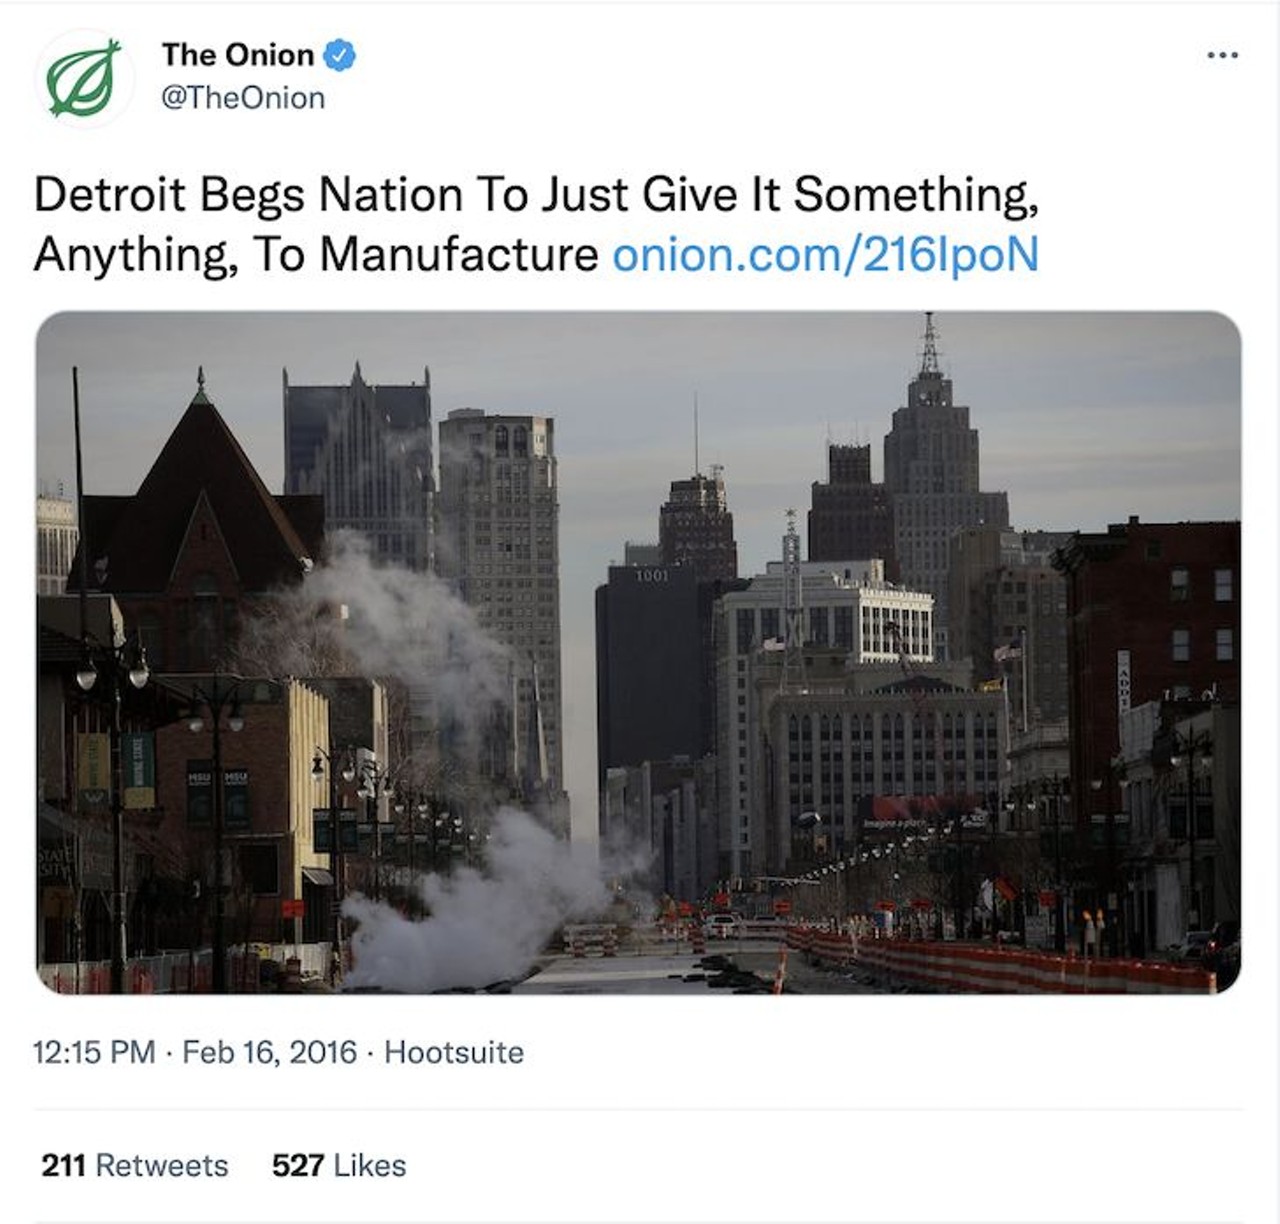 Detroit Begs Nation To Just Give It Something, Anything, To Manufacture
Detroit Mayor Mike Duggan promises that there are thousands of employees and manufacturing plants in the city just waiting for production, just &#133; please, tell us what to do.